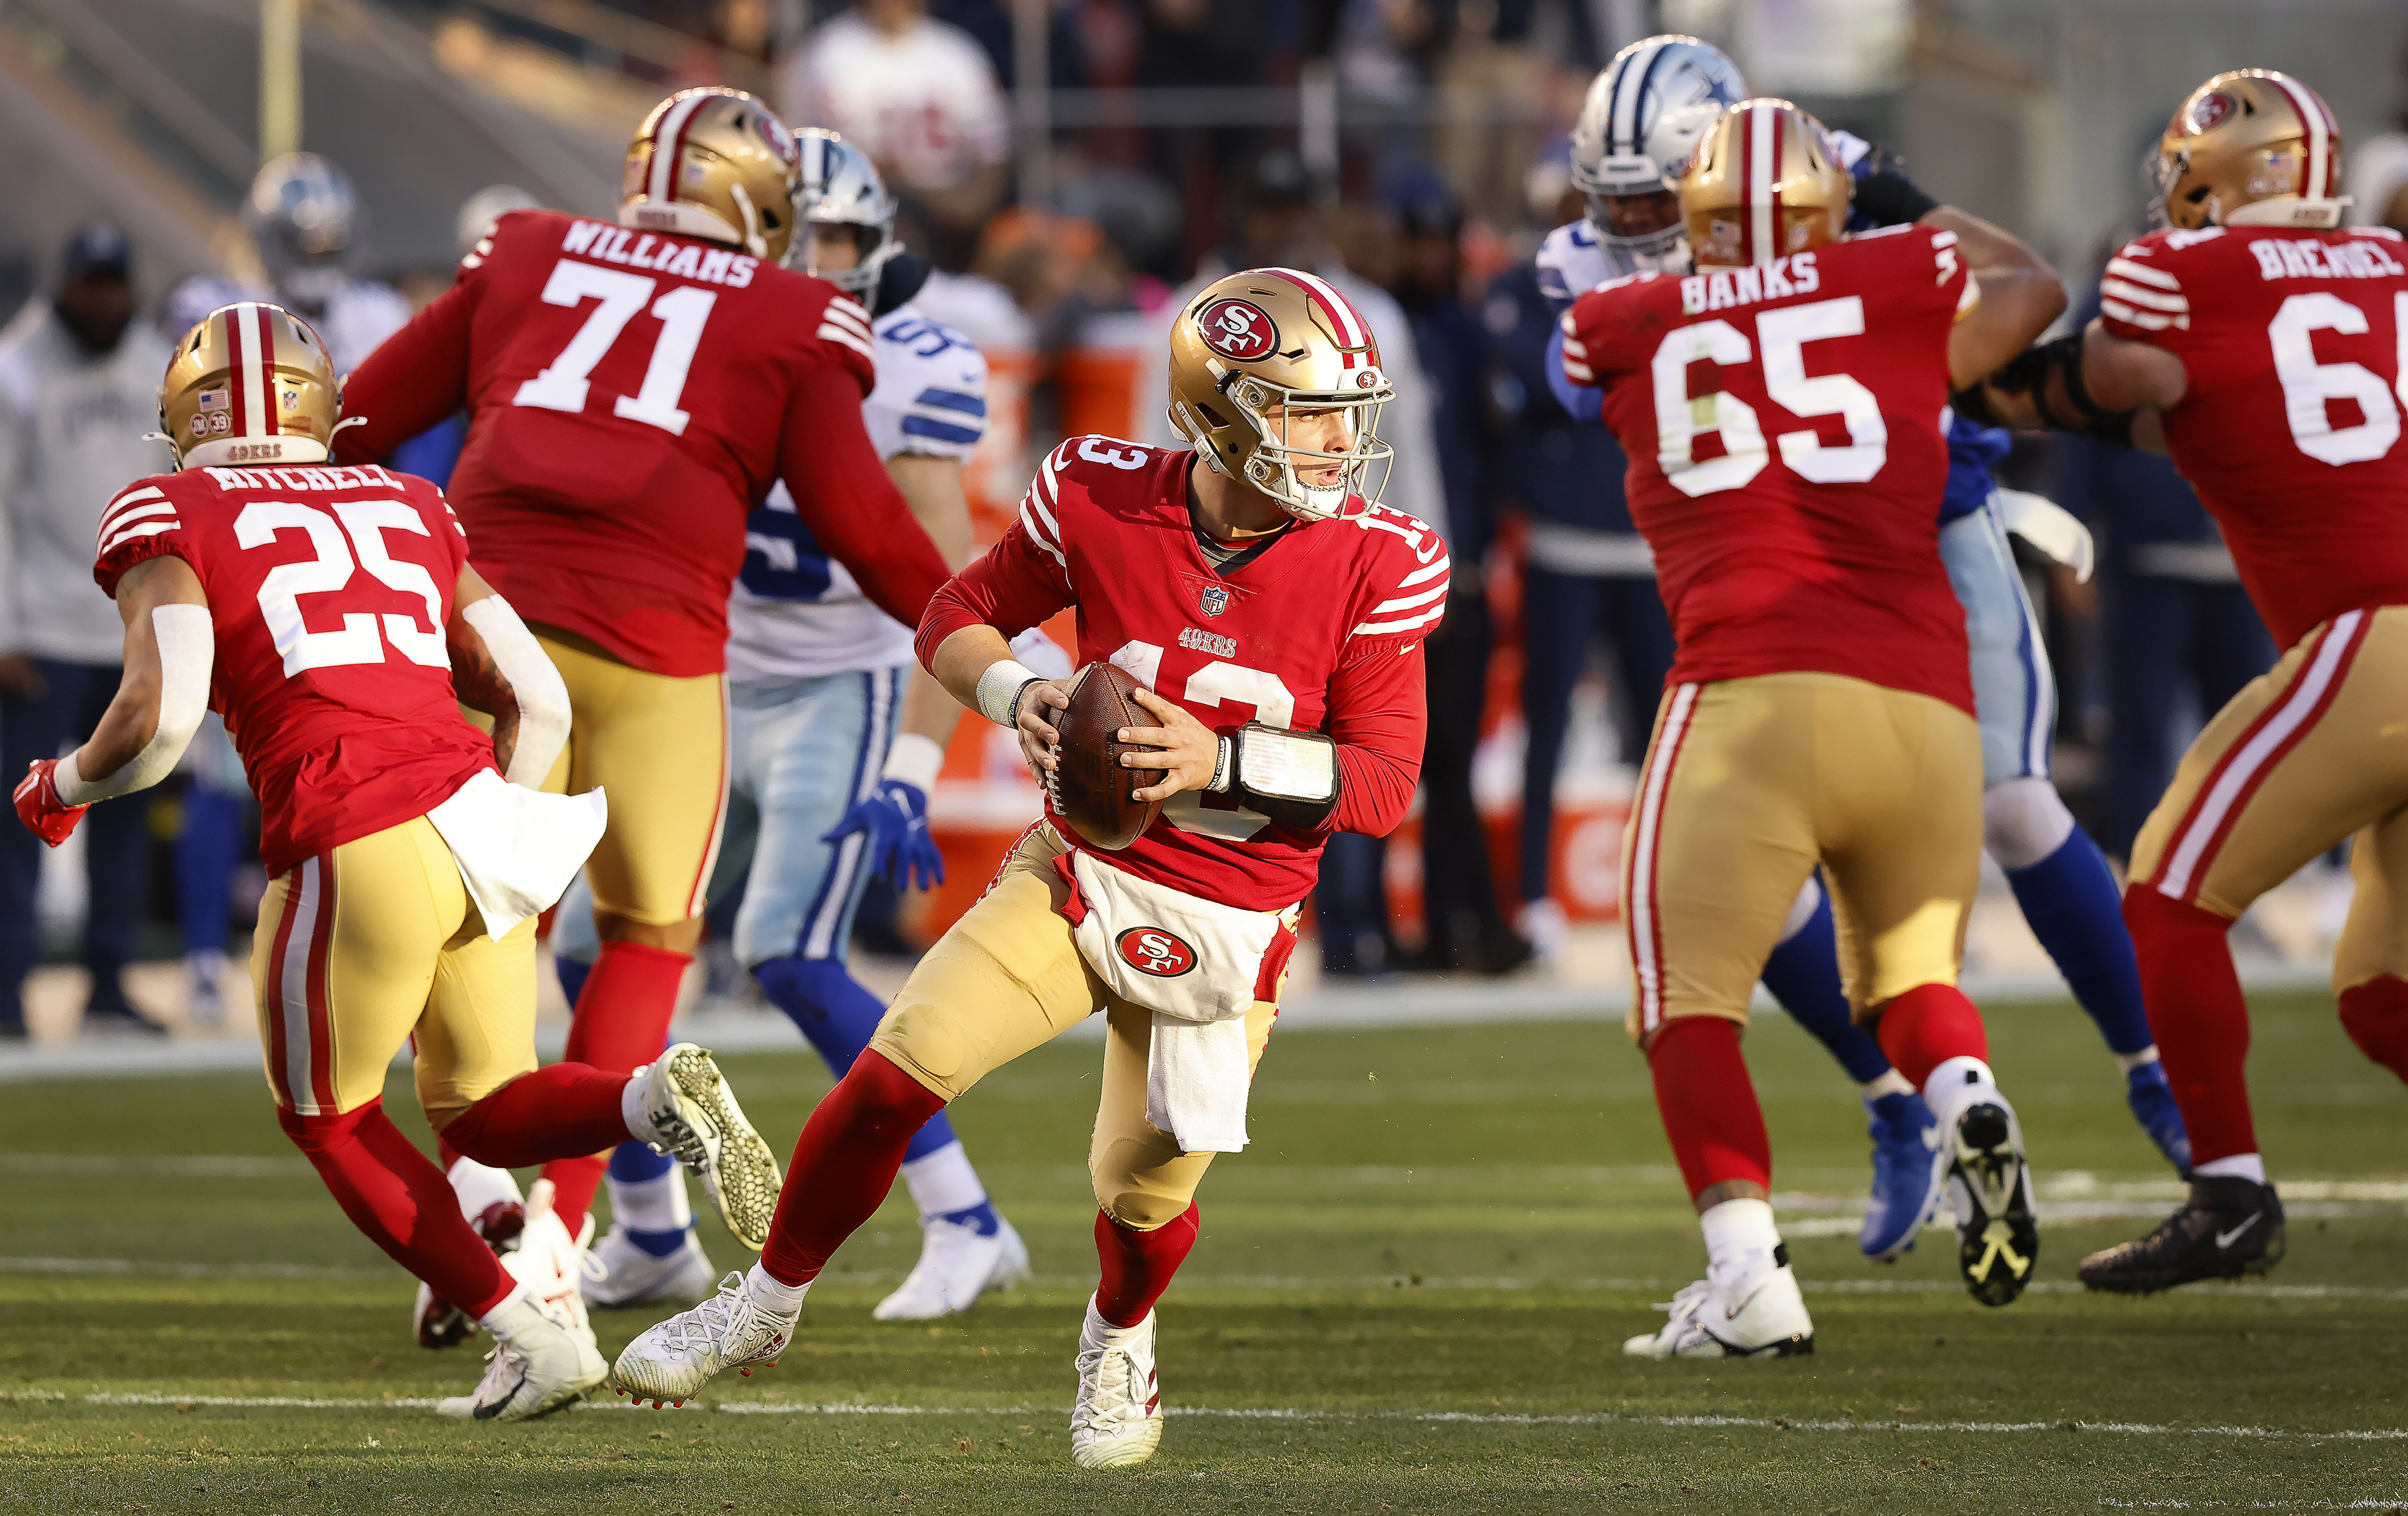 Who is Brock Purdy? Meet rookie QB tasked with saving 49ers'